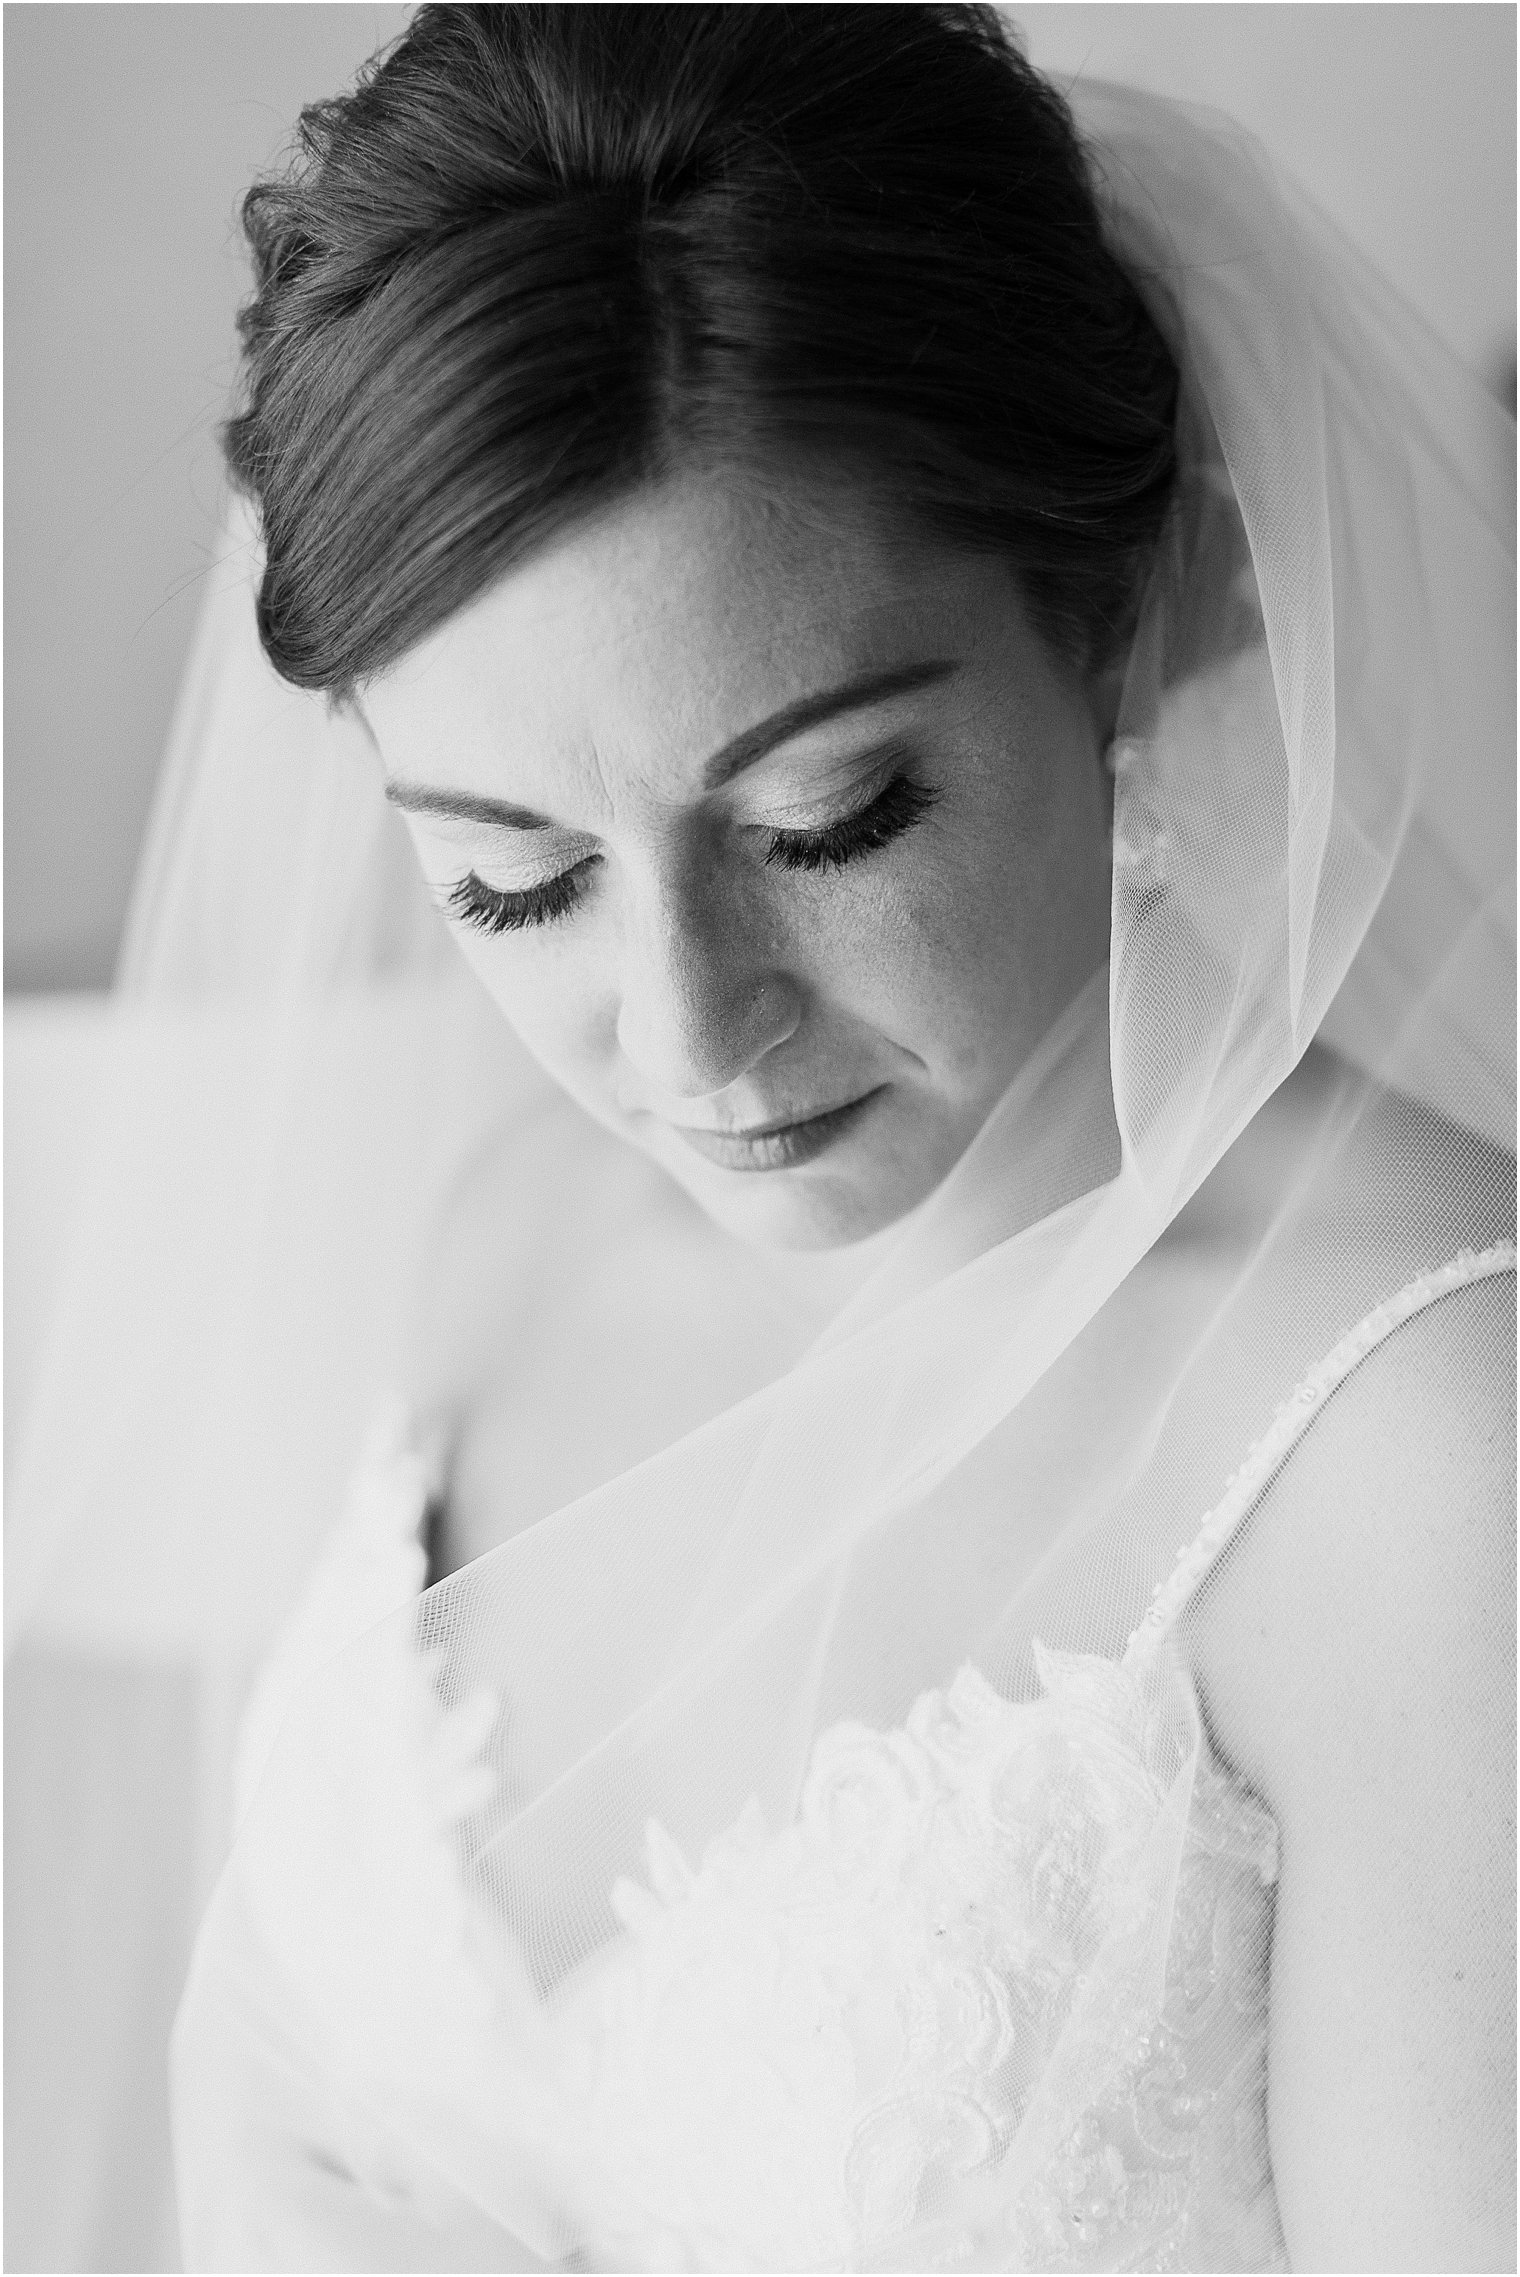 Bridal portrait in black and white at Clarks Landing Yacht Club